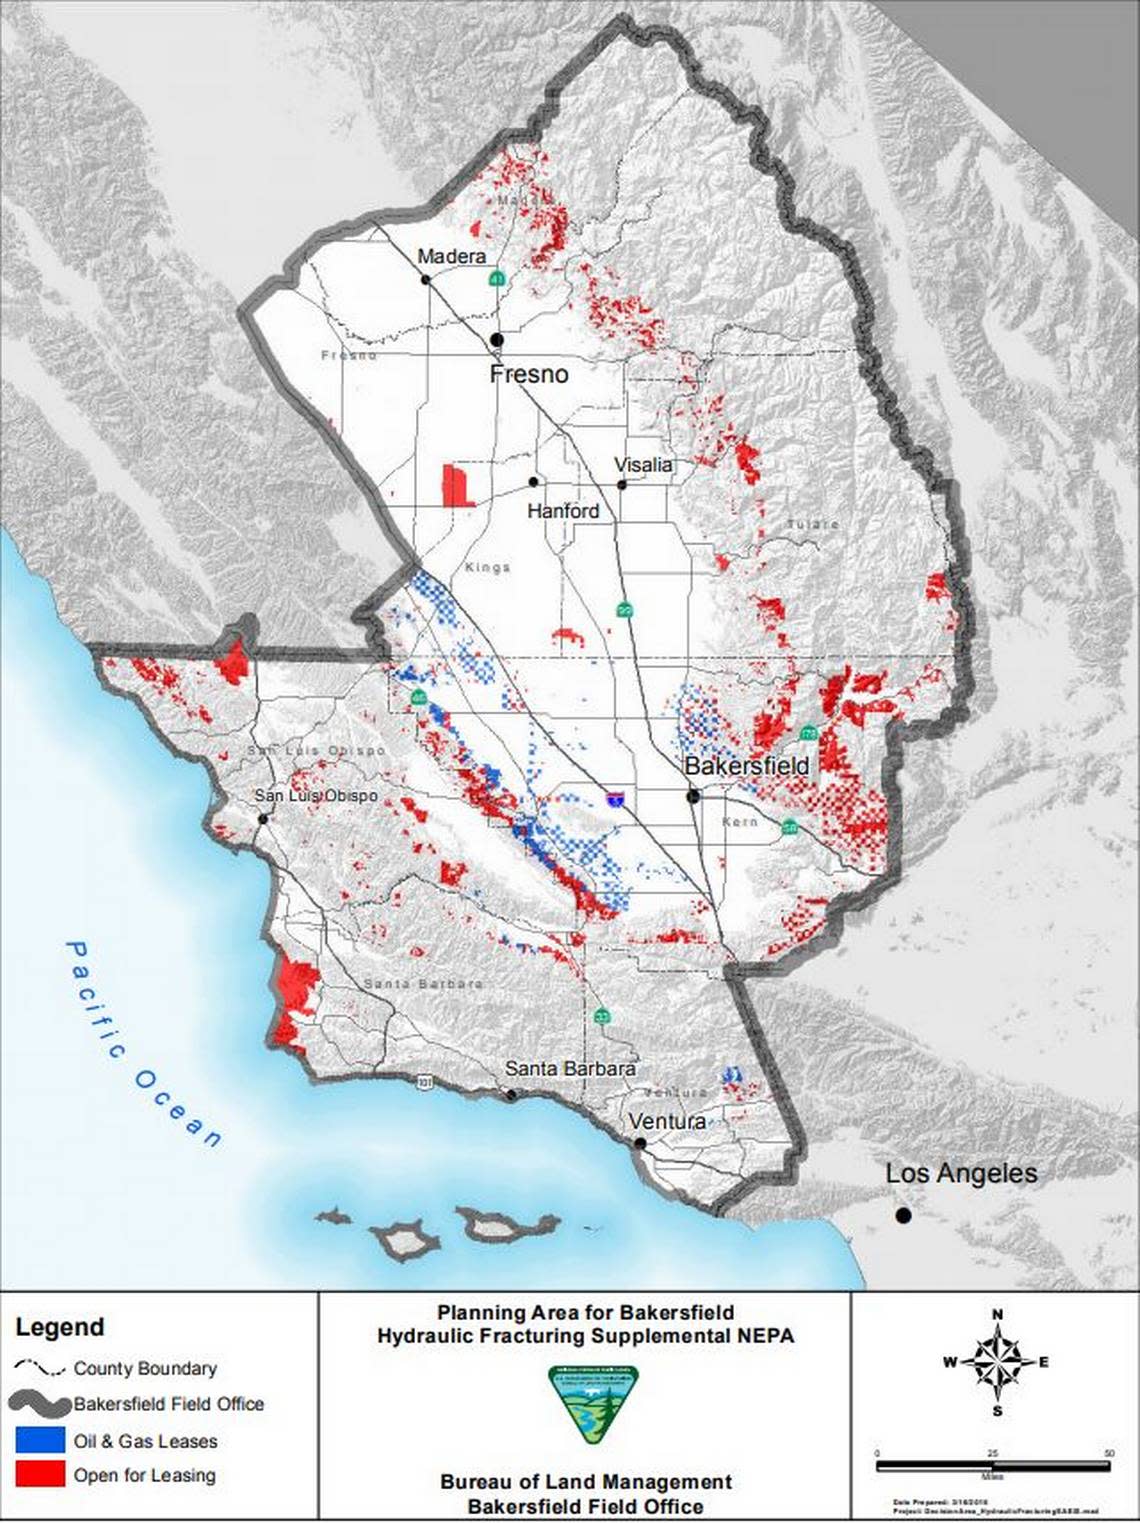 A map of the planning area for Bureau of Land Management Bakersfield Hydraulic Fracturing Supplemental NEPA.